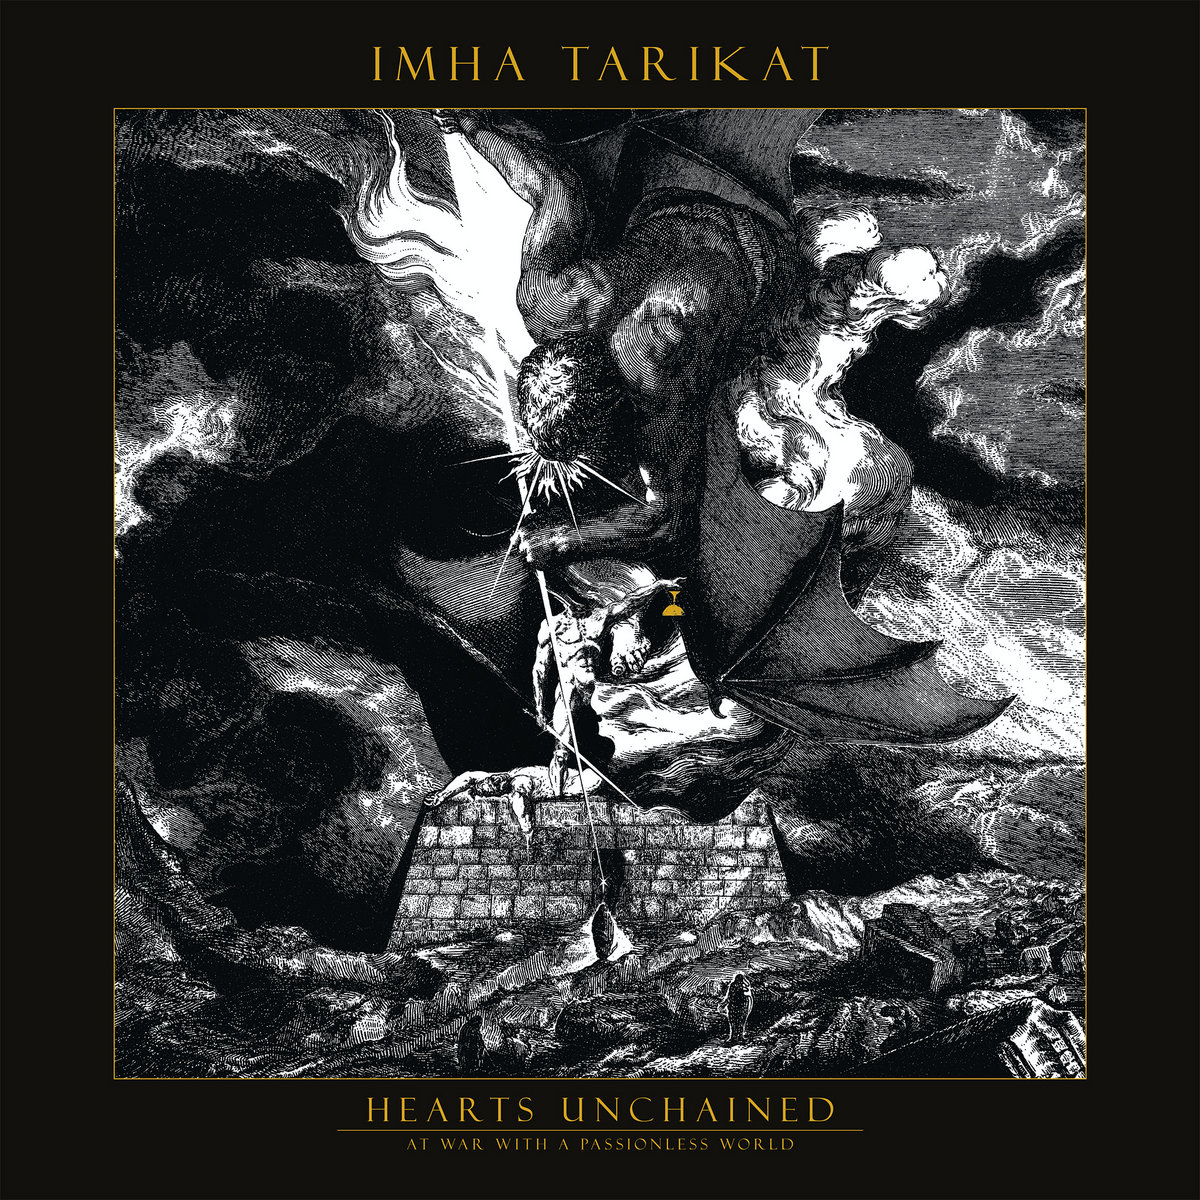 Imha Tarikat - Hearts unchained (At war with a passionless world)